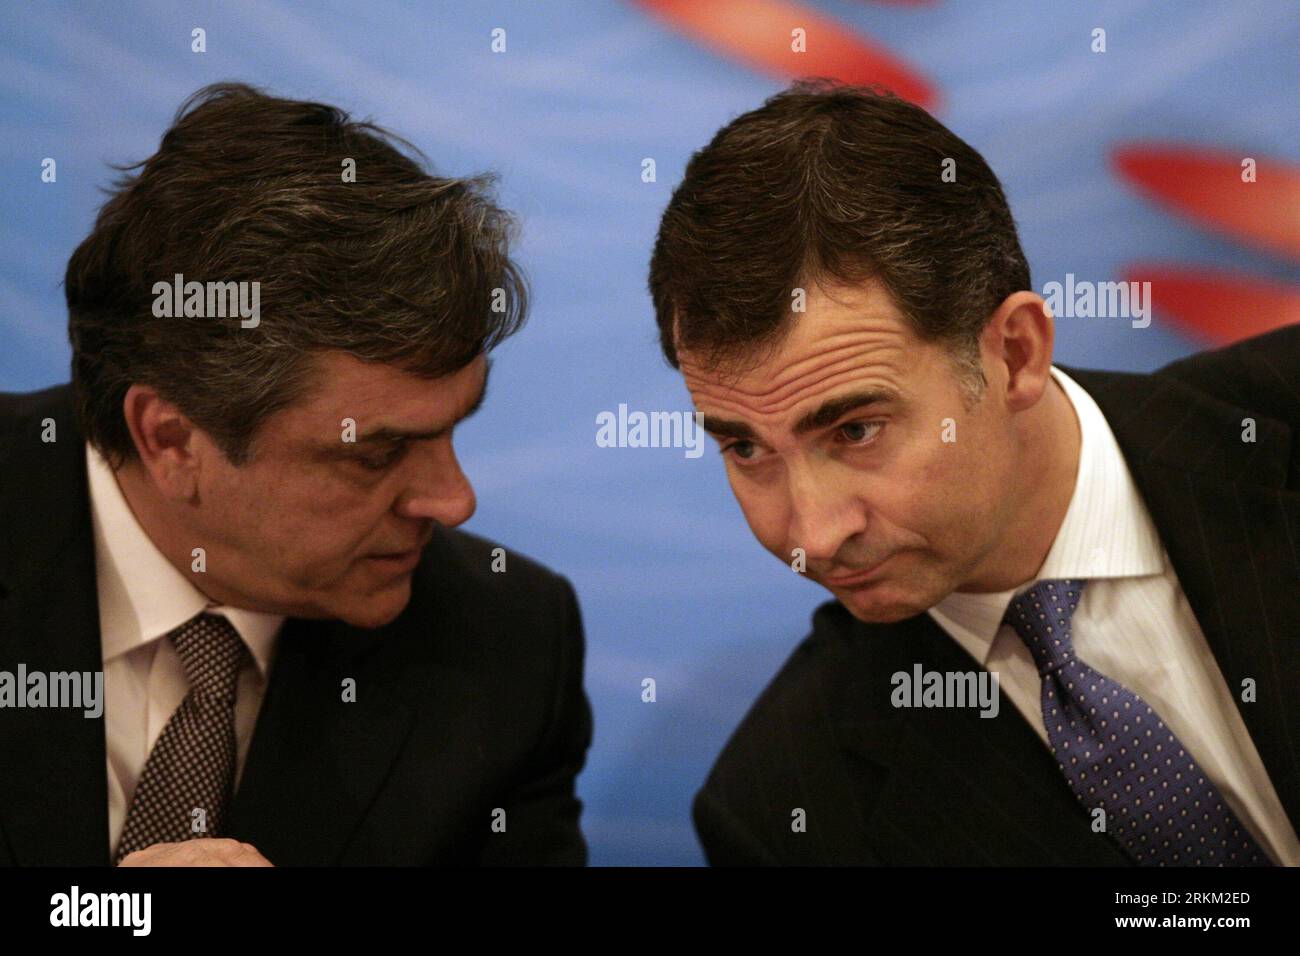 Bildnummer: 56396987  Datum: 22.11.2011  Copyright: imago/Xinhua (111122) -- SANTIAGO, Nov. 22, 2011 (Xinhua) -- Felipe de Borbon Prince of Asturias (L) talks with the Economy Minister Pablo Longueira in the Chile-Spain economic forum in Santiago, capital of Chile, on Nov. 22, 2011. The Princes of Asturias are on an official visit to Chile. (Xinhua/Victor Rojas) CHILE-SANTIAGO-SPAIN-VISIT PUBLICATIONxNOTxINxCHN People Adel ESP premiumd xns x0x 2011 quer      56396987 Date 22 11 2011 Copyright Imago XINHUA  Santiago Nov 22 2011 XINHUA Felipe de Borbon Prince of Asturias l Talks With The Economy Stock Photo